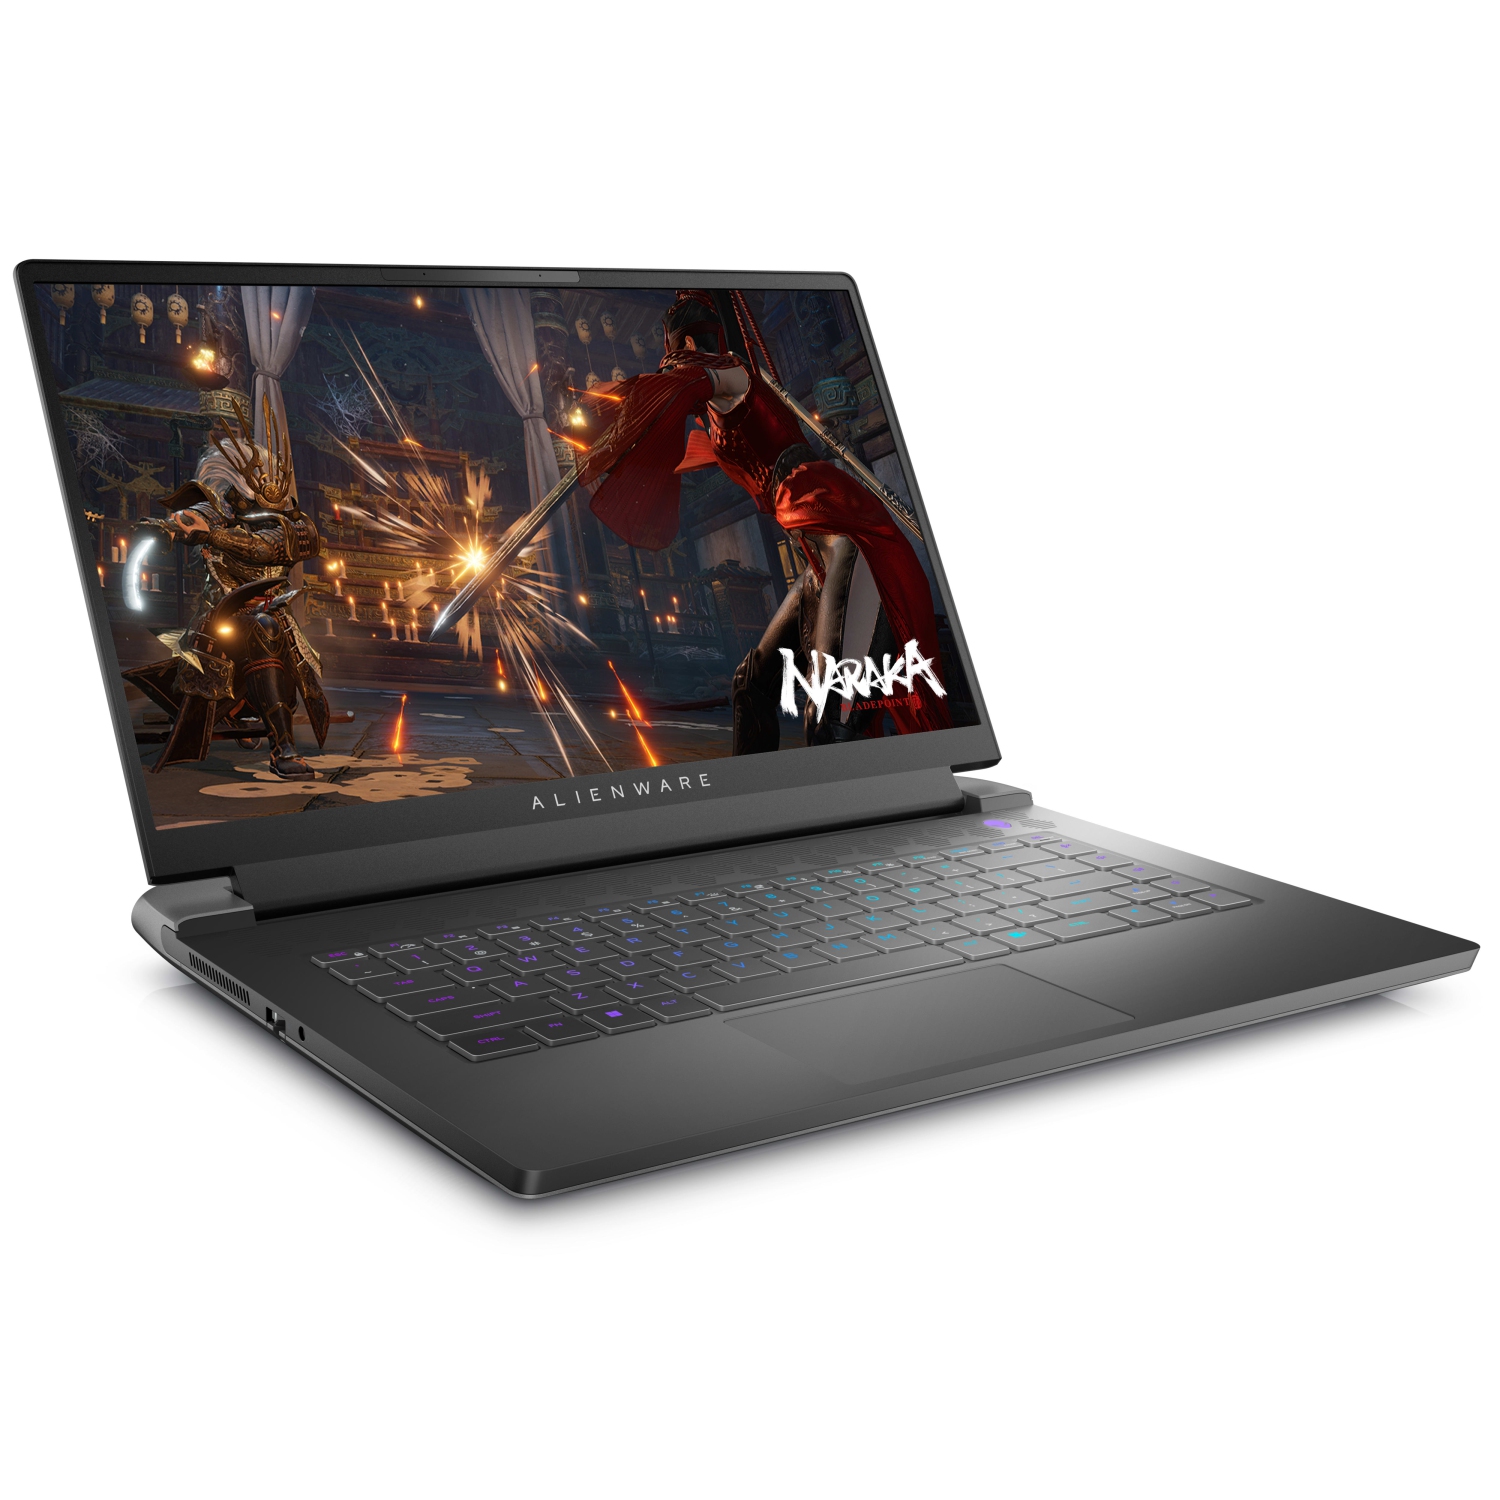 Refurbished (Excellent) – Dell Alienware m15 R7 Gaming Laptop (2022) | 15.6" FHD | Core i7 - 4TB SSD - 32GB RAM - 3070 Ti | 14 Cores @ 4.7 GHz - 12th Gen CPU - 8GB GDDR6X